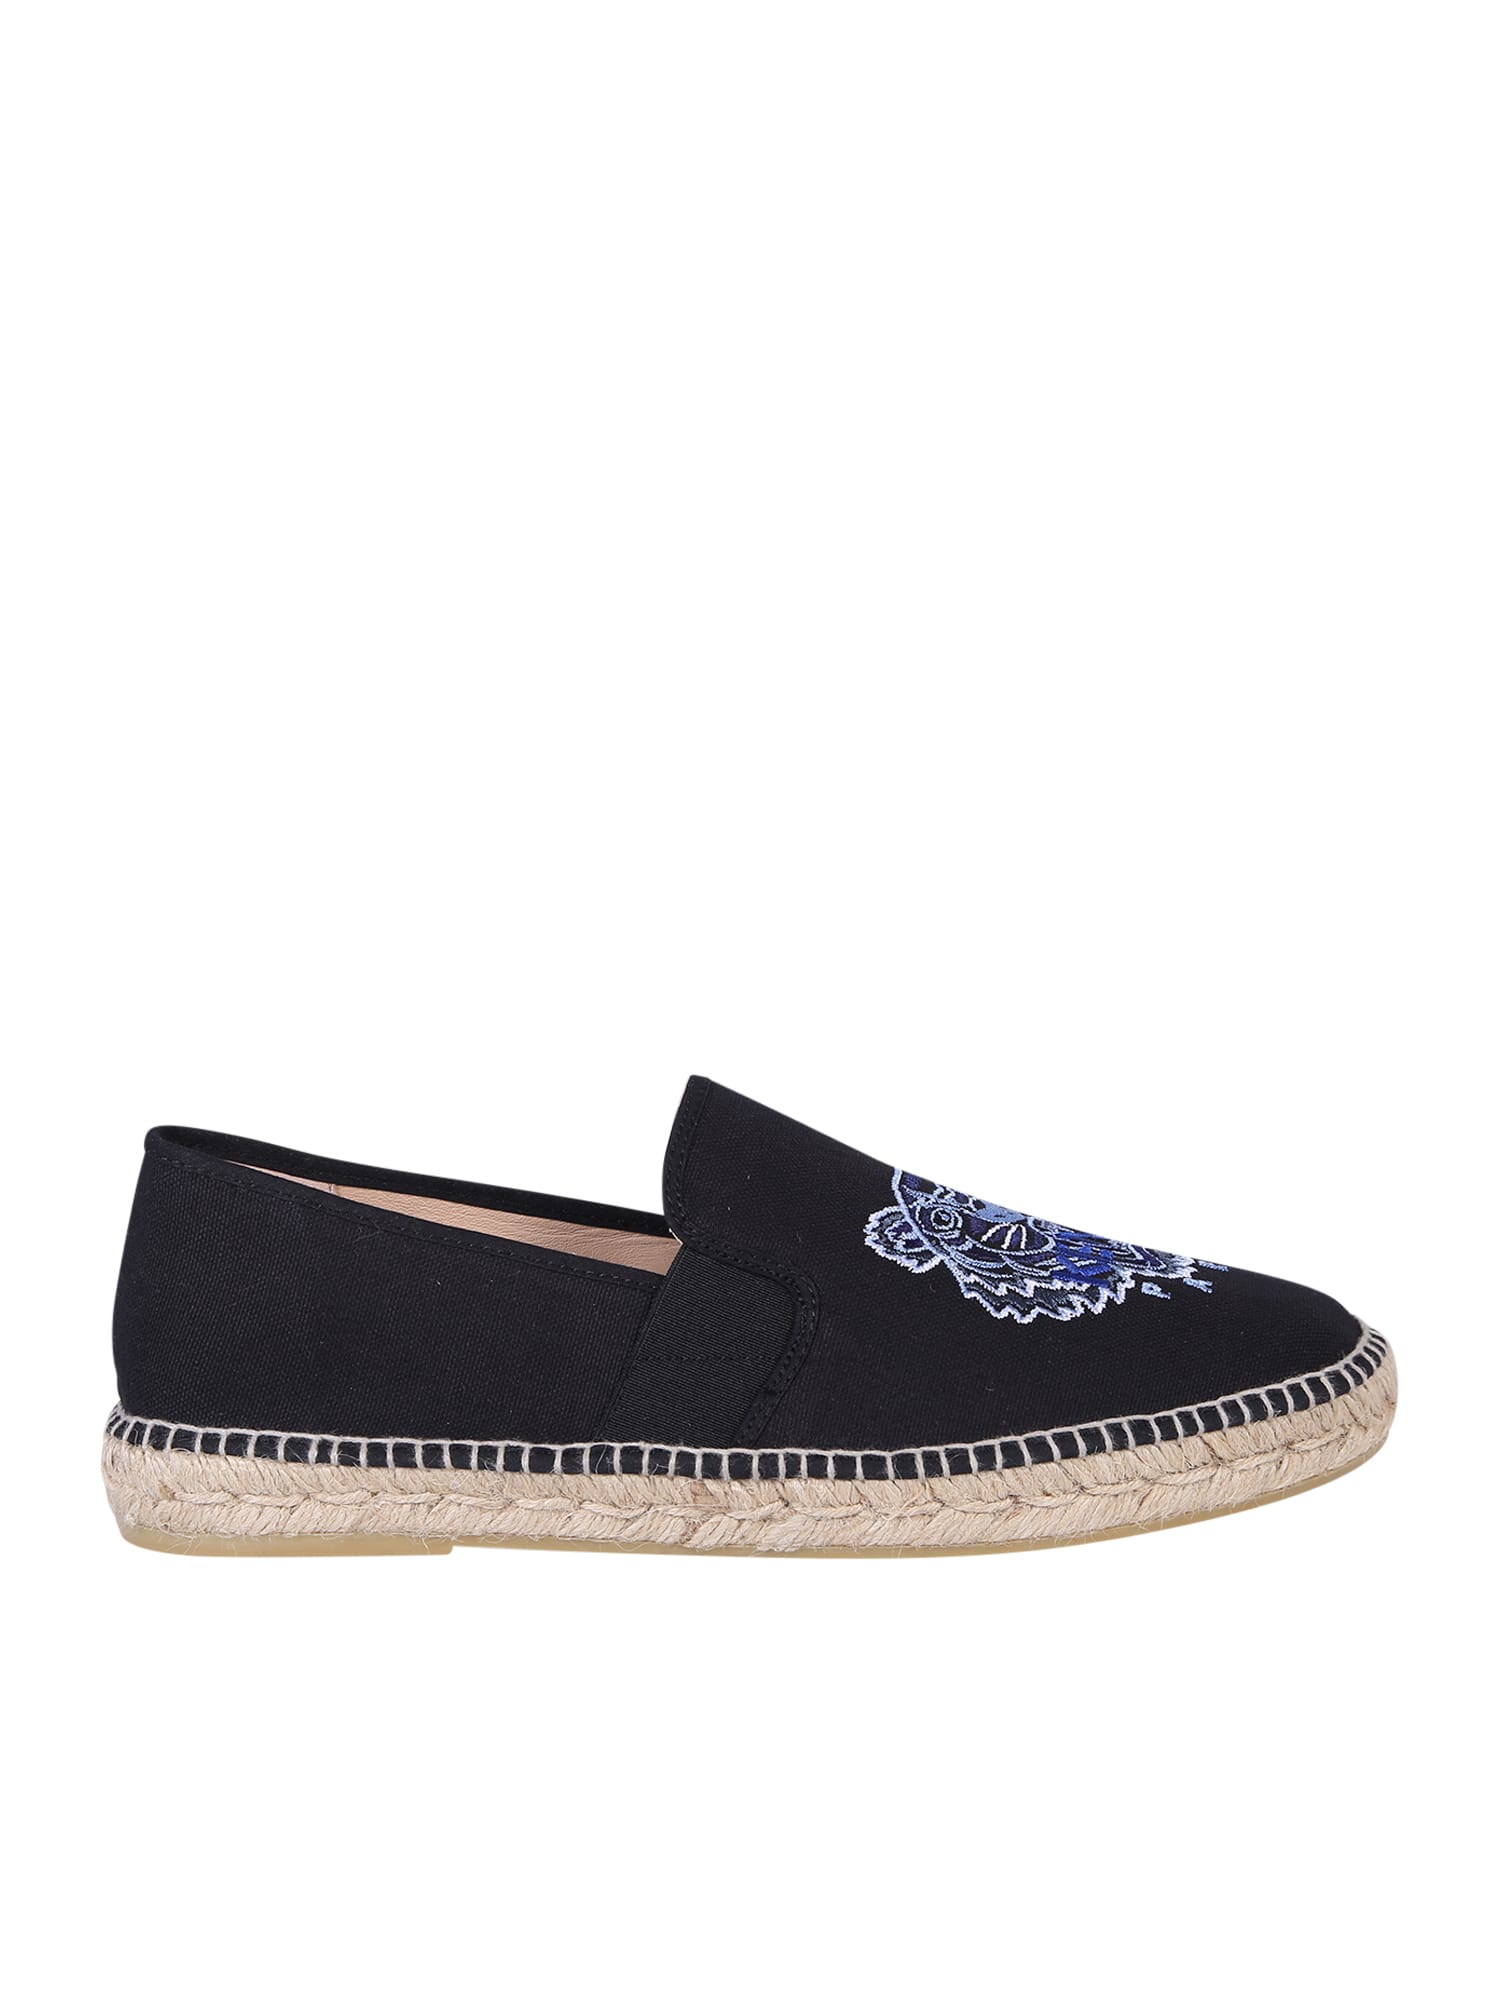 Kenzo Embroidered Espadrilles